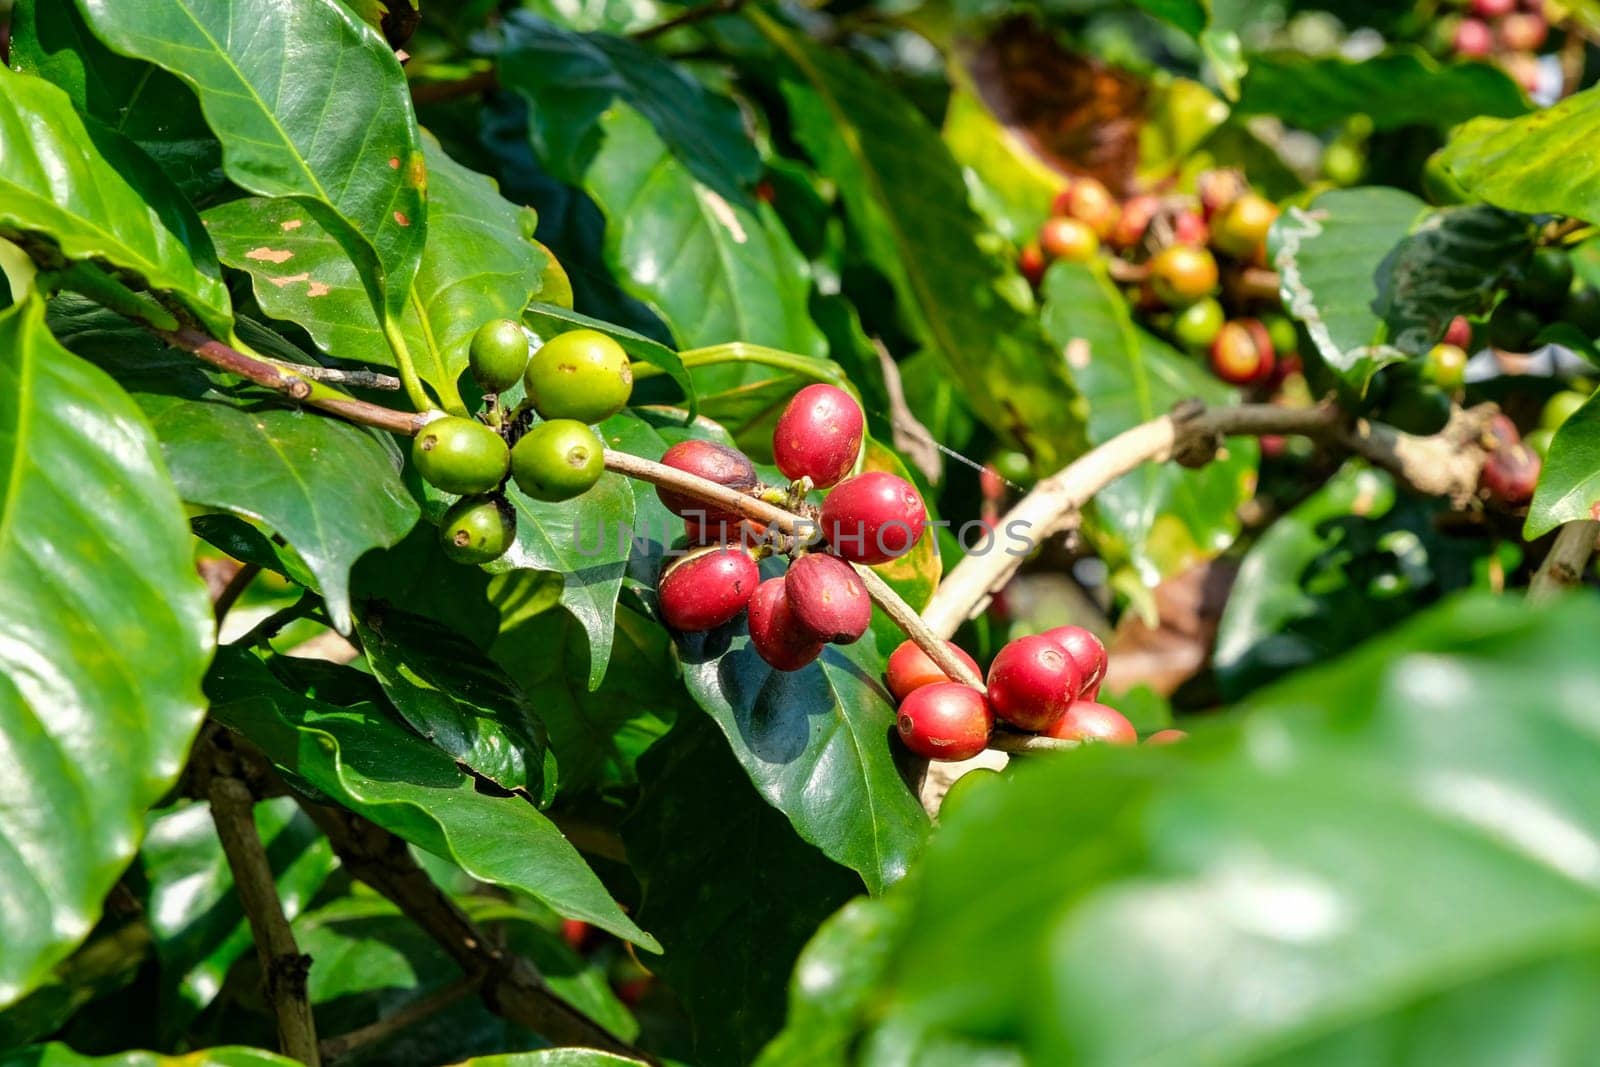 Raw and ripe Arabica coffee beans in a coffee plantation. Ripe coffee beans from organically grown Arabica coffee trees.